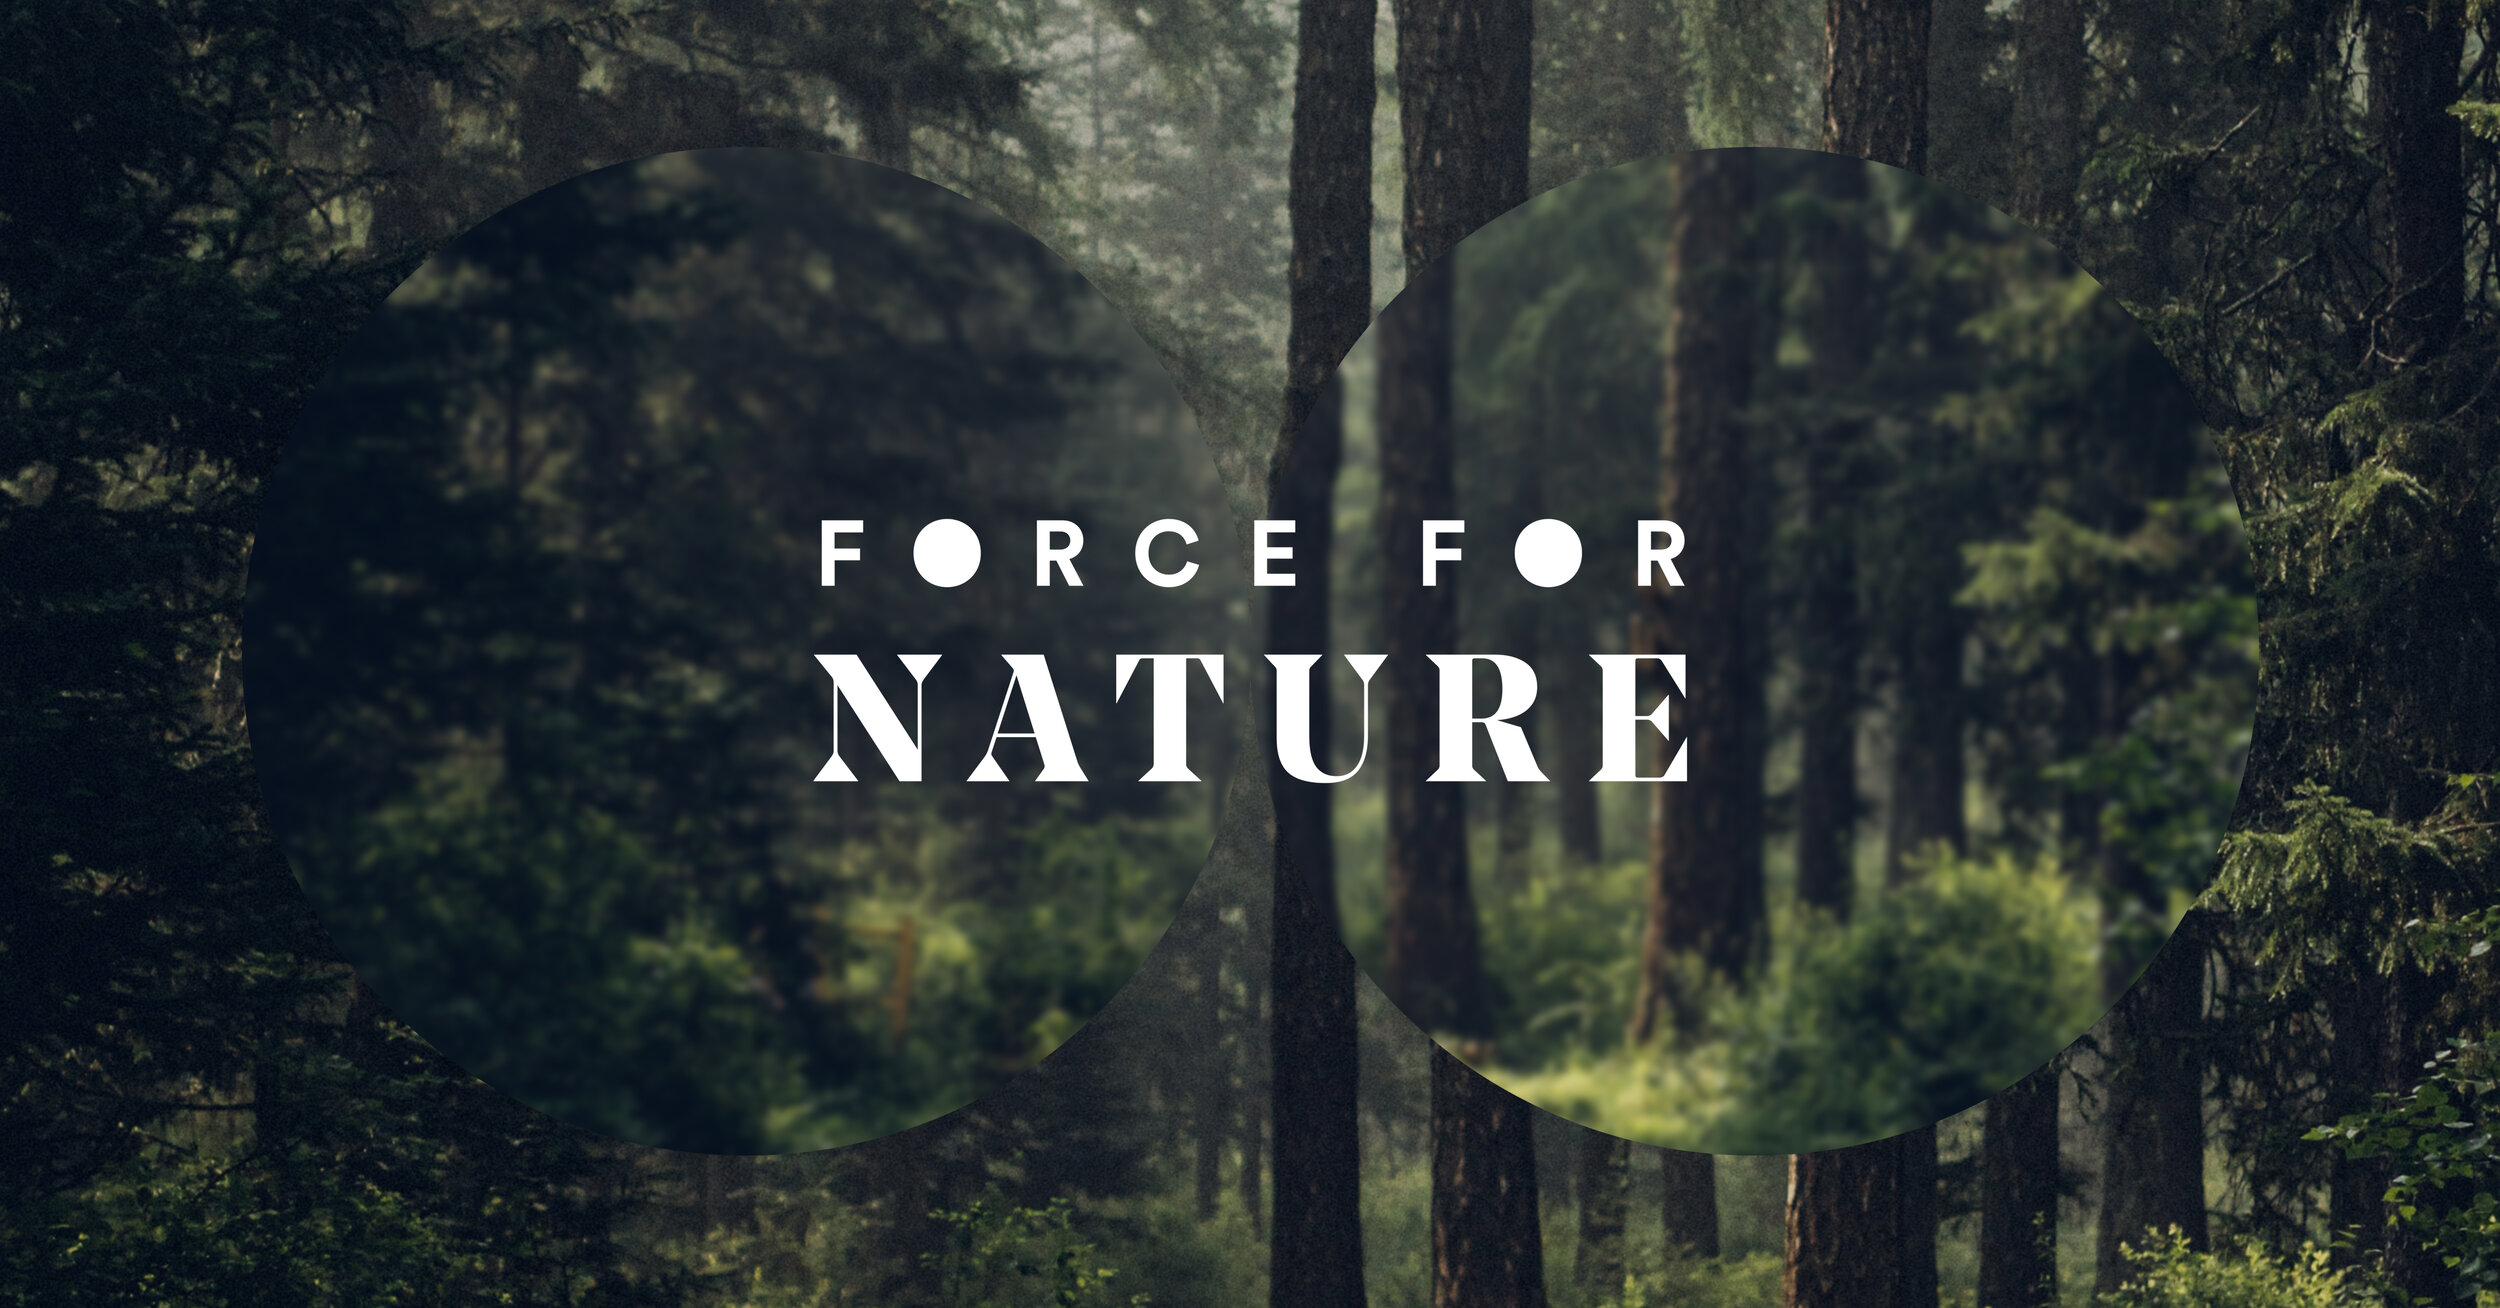 Force Nature